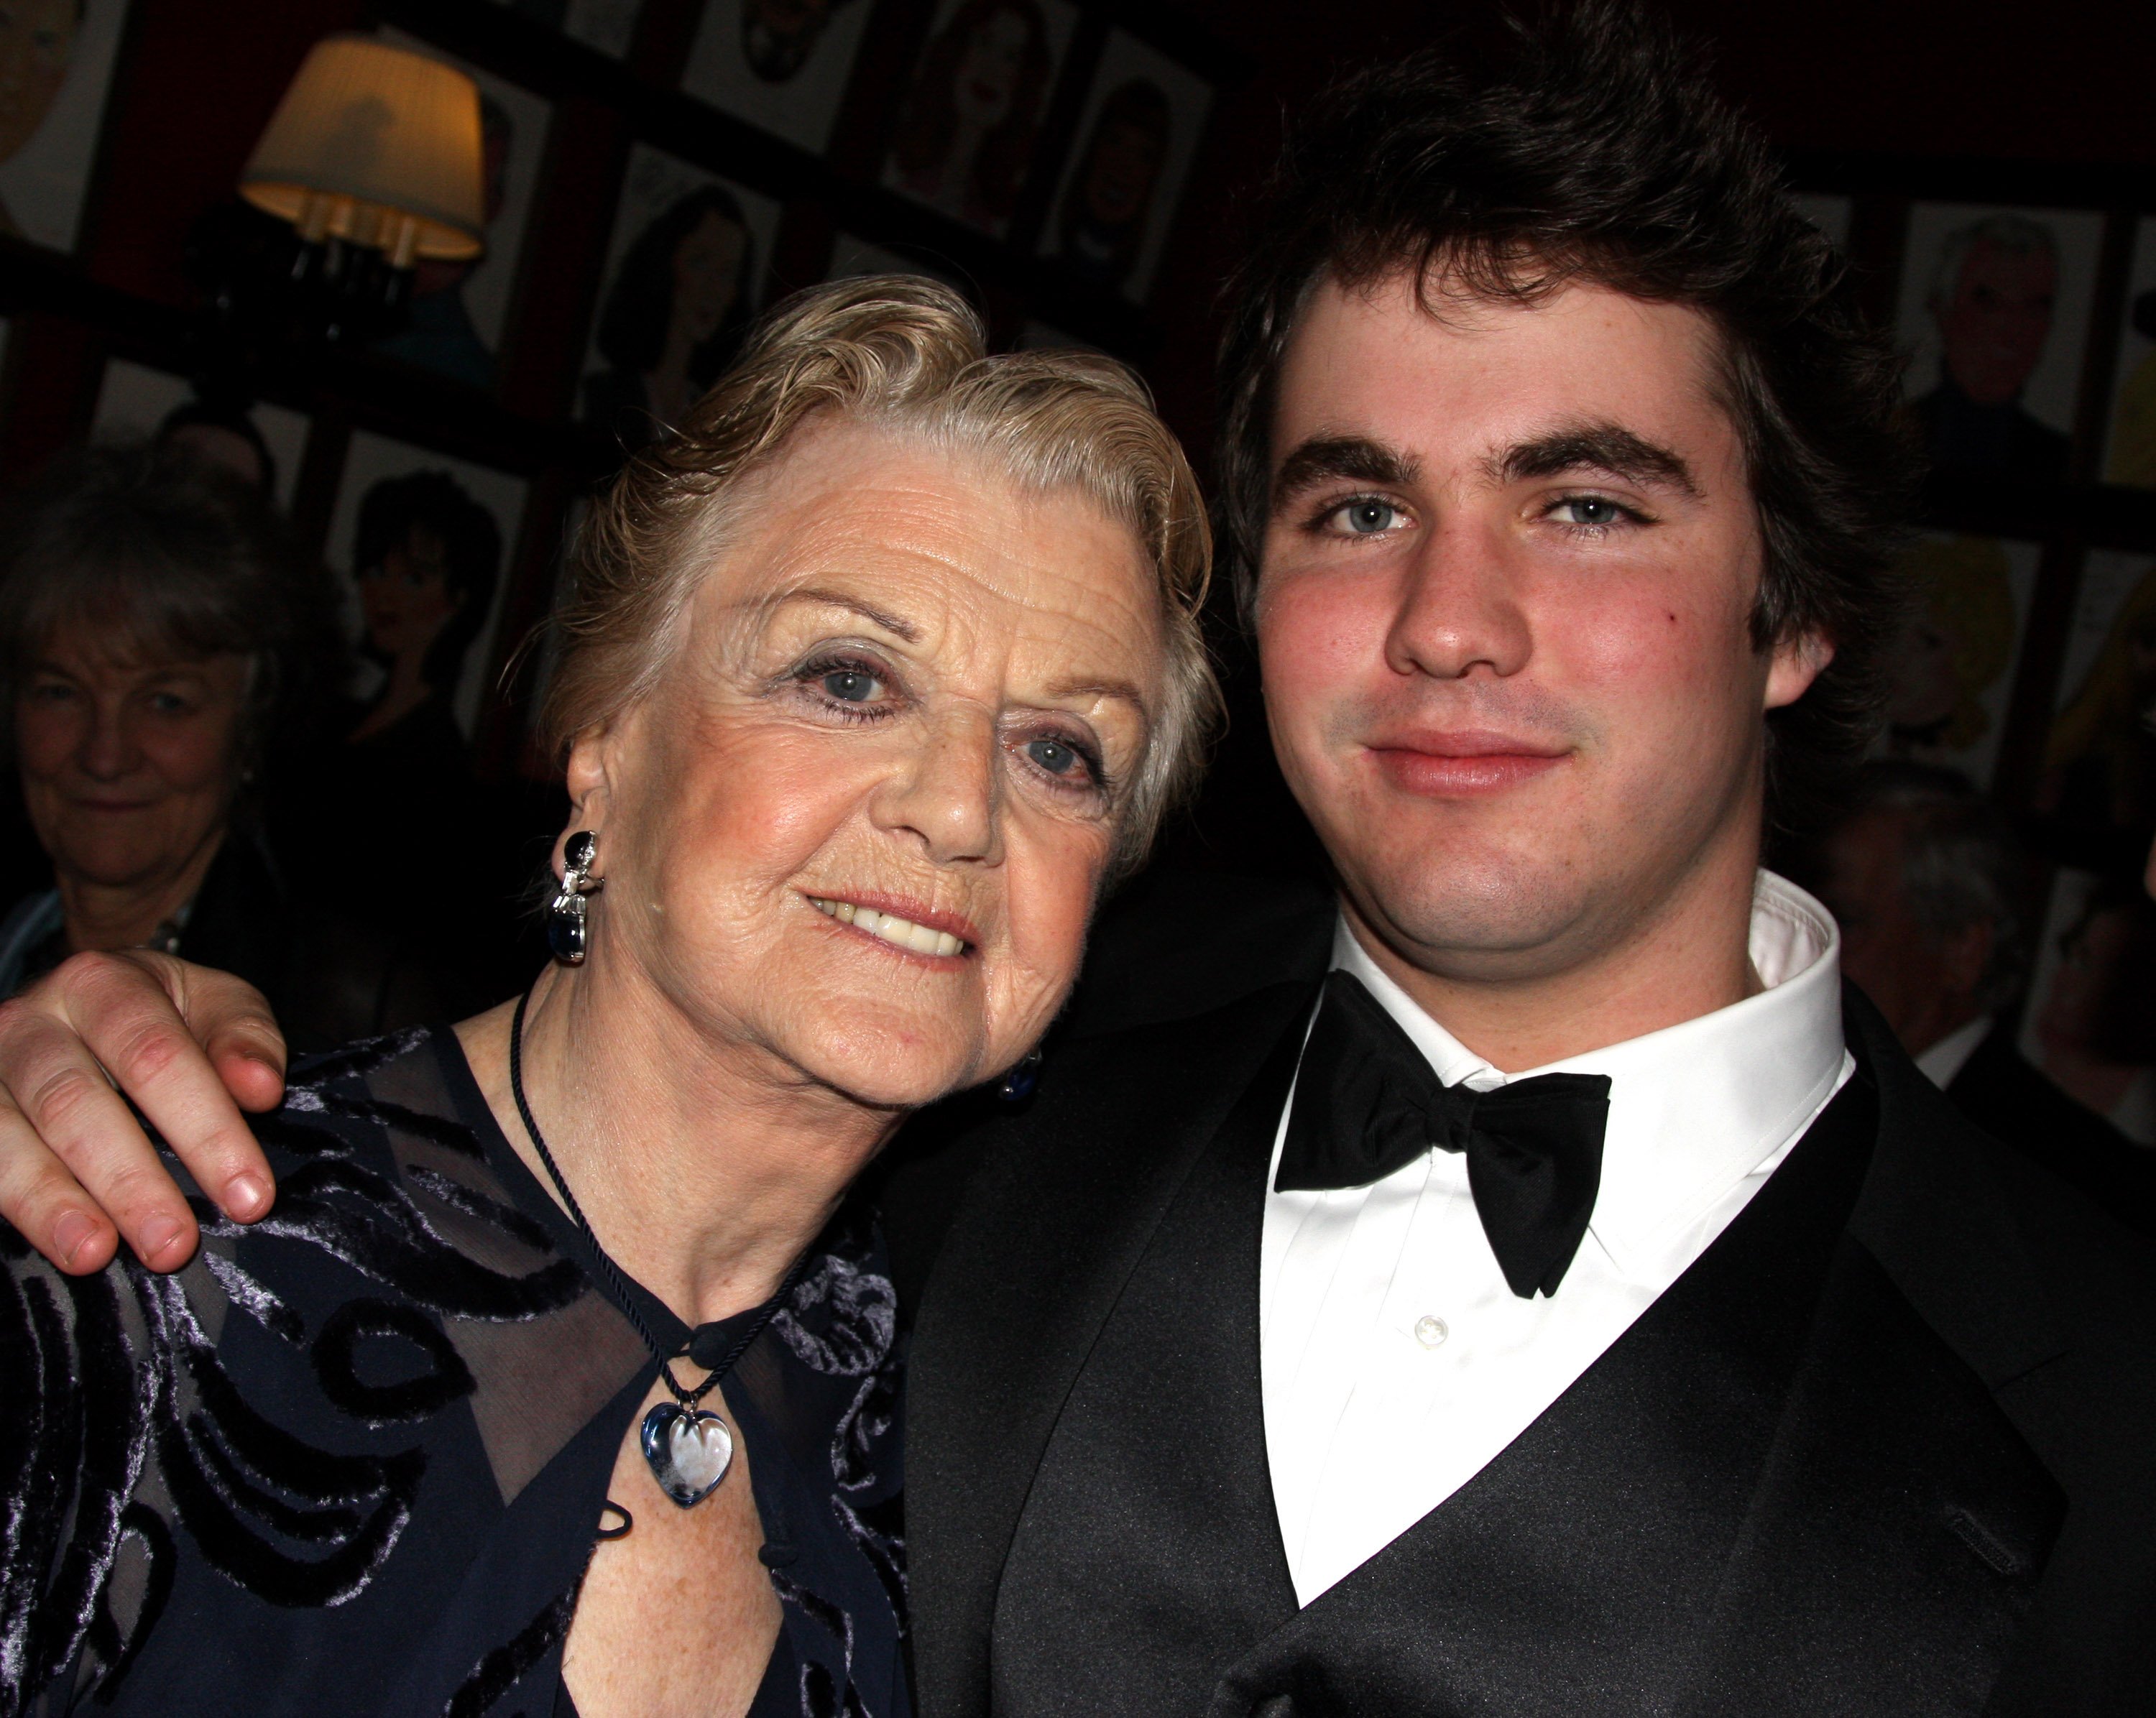 Angela Lansbury and her grandson attend the Blithe Spirit Broadway opening night party at Sardi's on March 15, 2009 in New York City. | Source: Getty Images